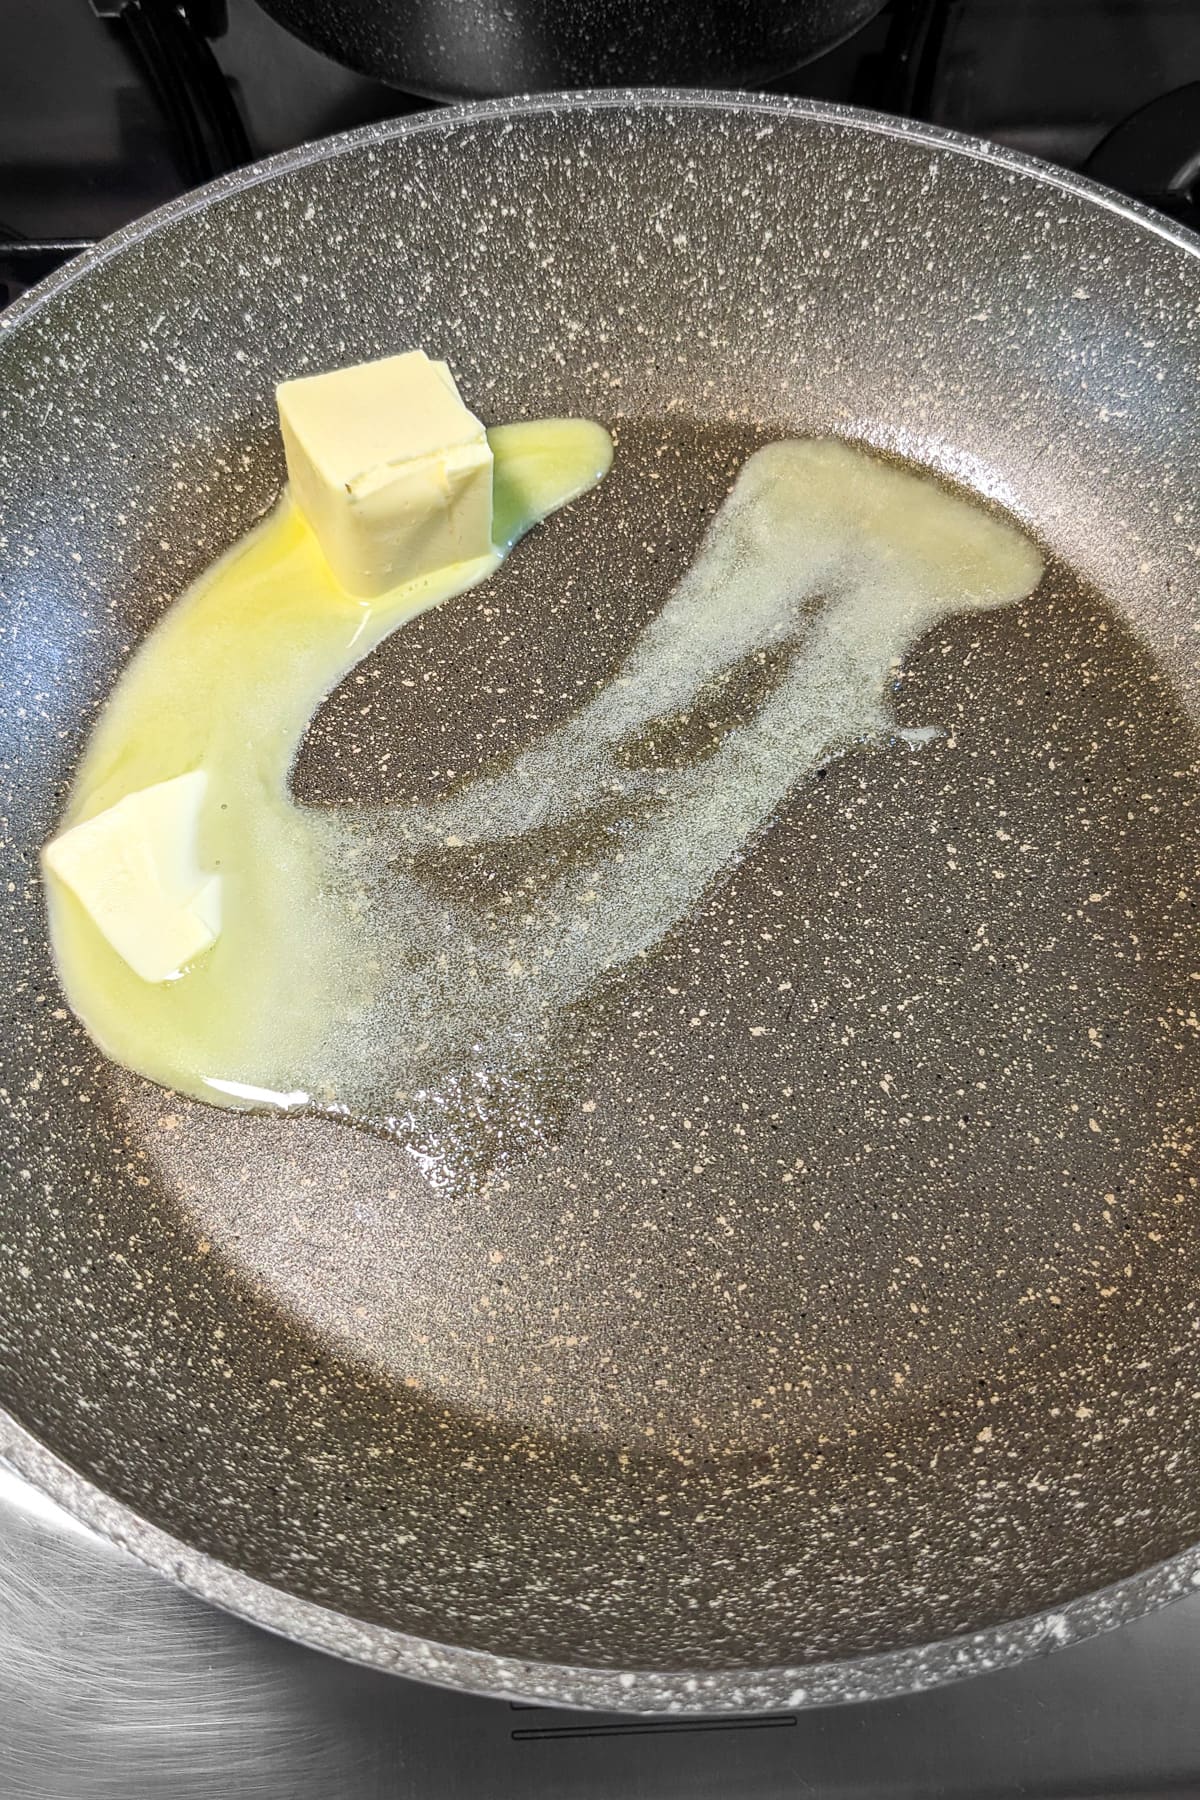 Melting butter in a sauce pan on the stove.